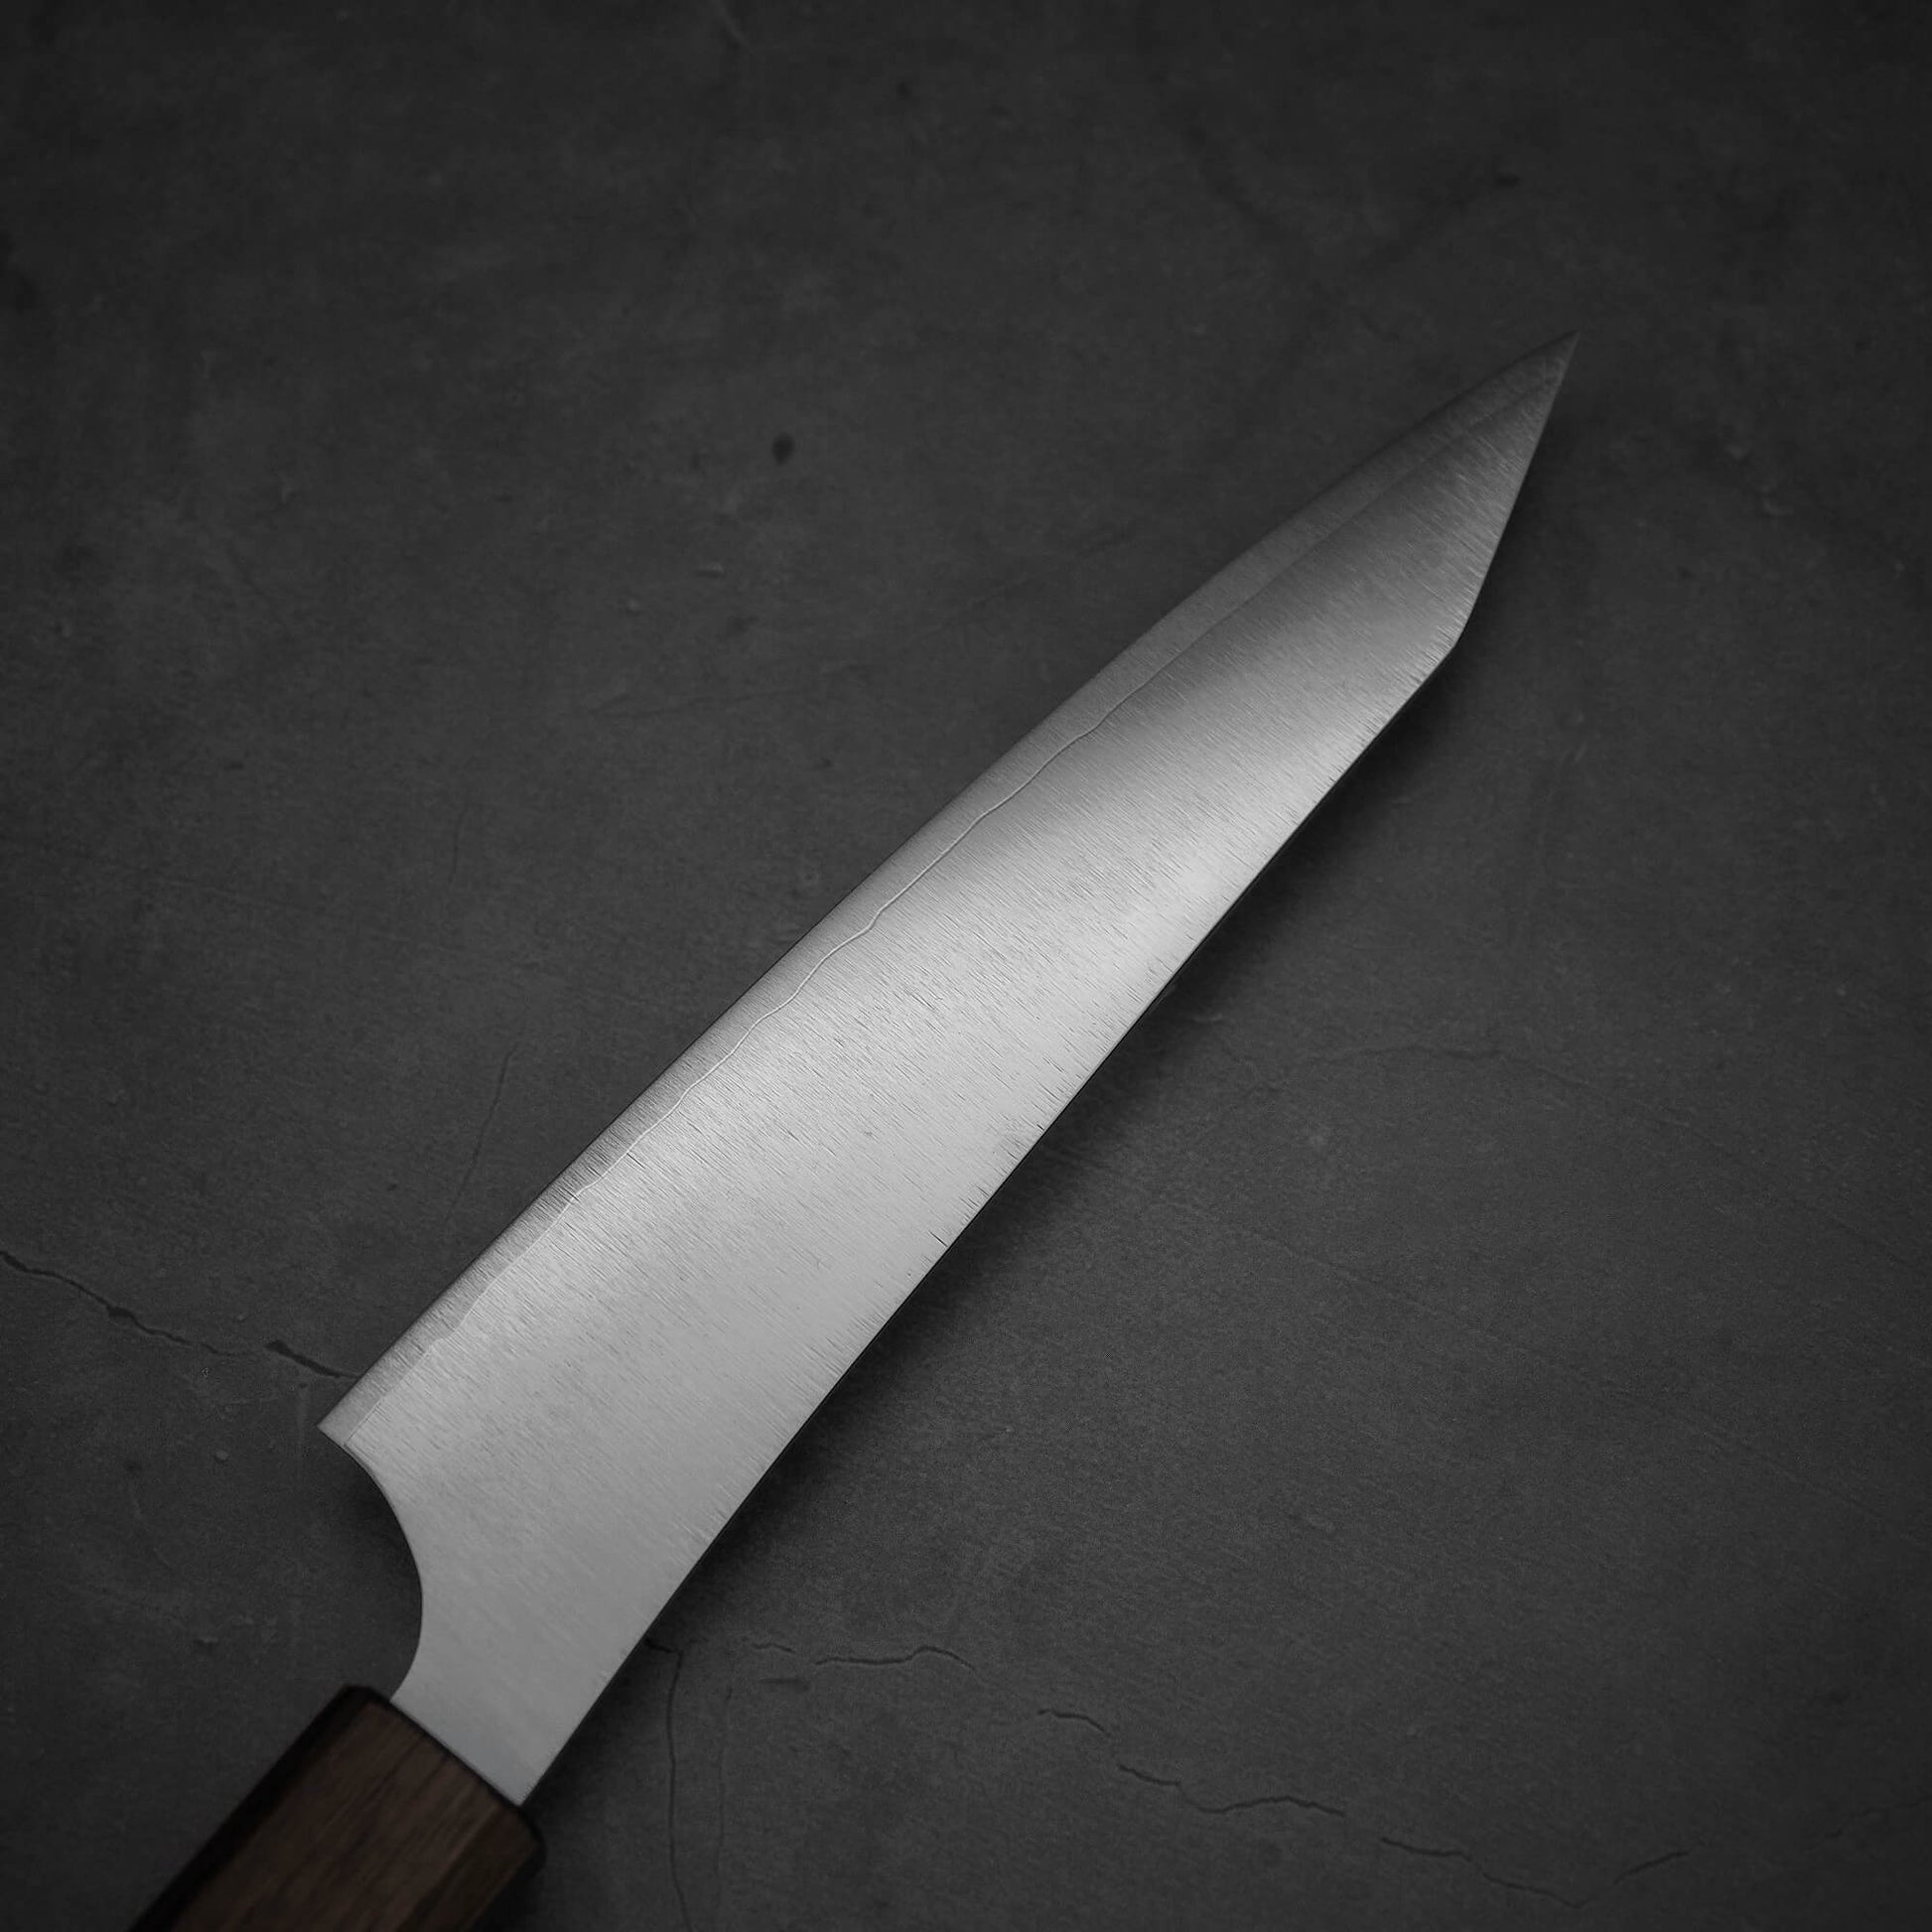 Top view of the blade of a Yu Kurosaki HAP40 Gekko petty knife. Image shows the left side of the blade.